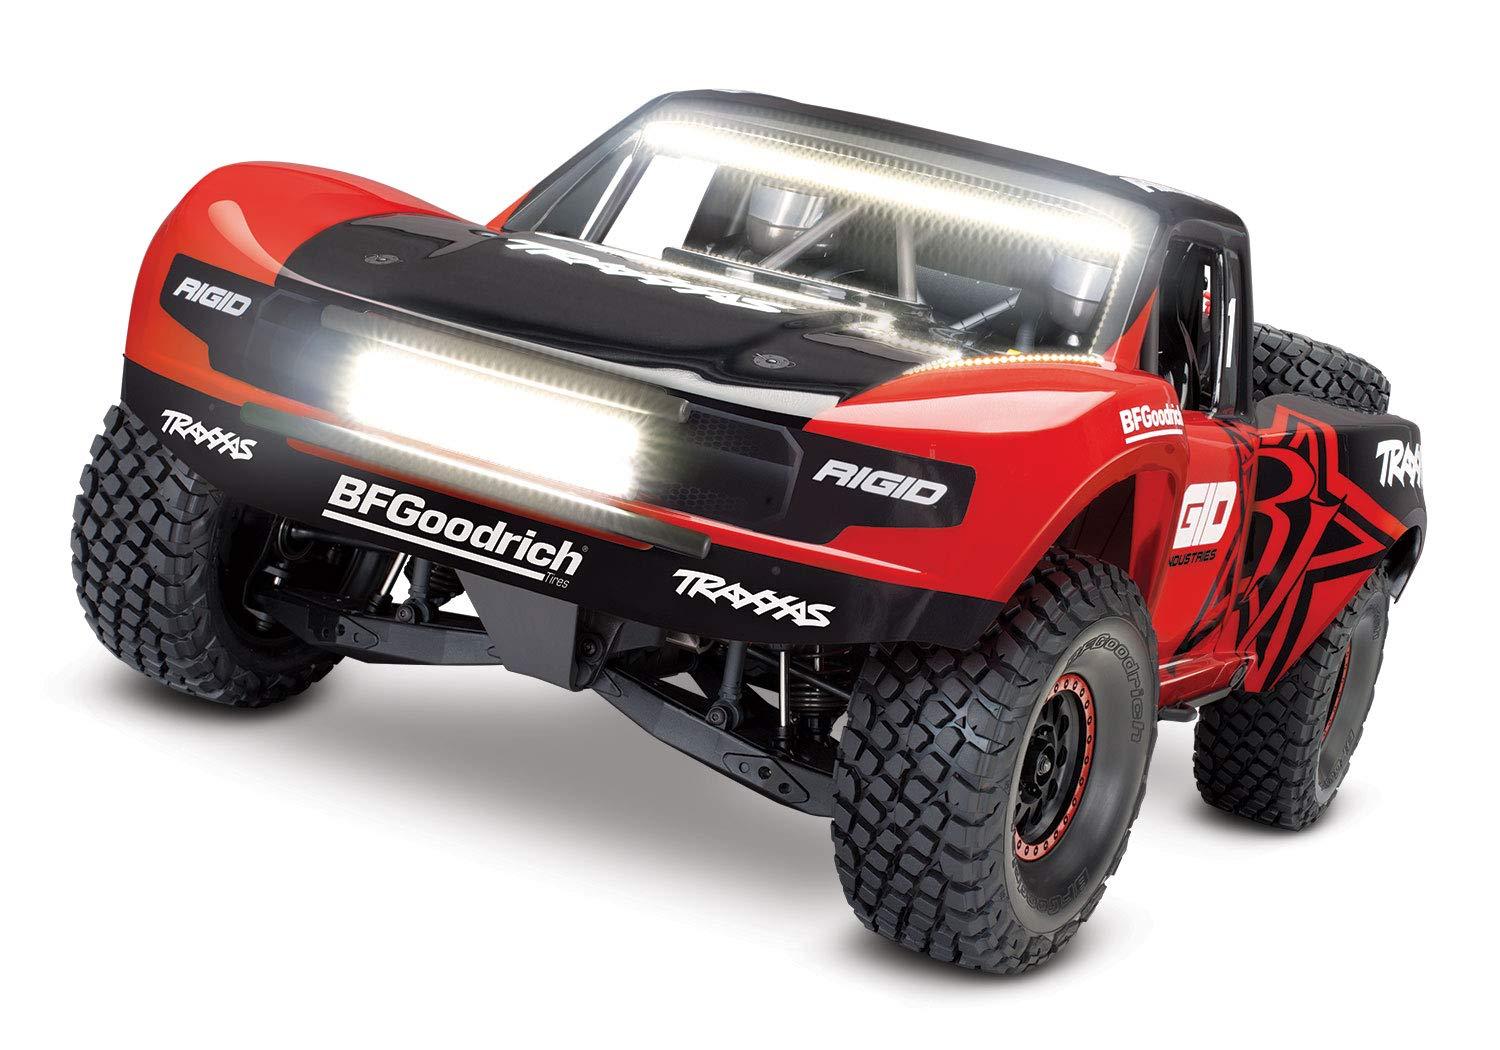 Traxxas Rc Cars 4X4: Affordable Options and Deals for Traxxas RC Cars 4x4 Enthusiasts